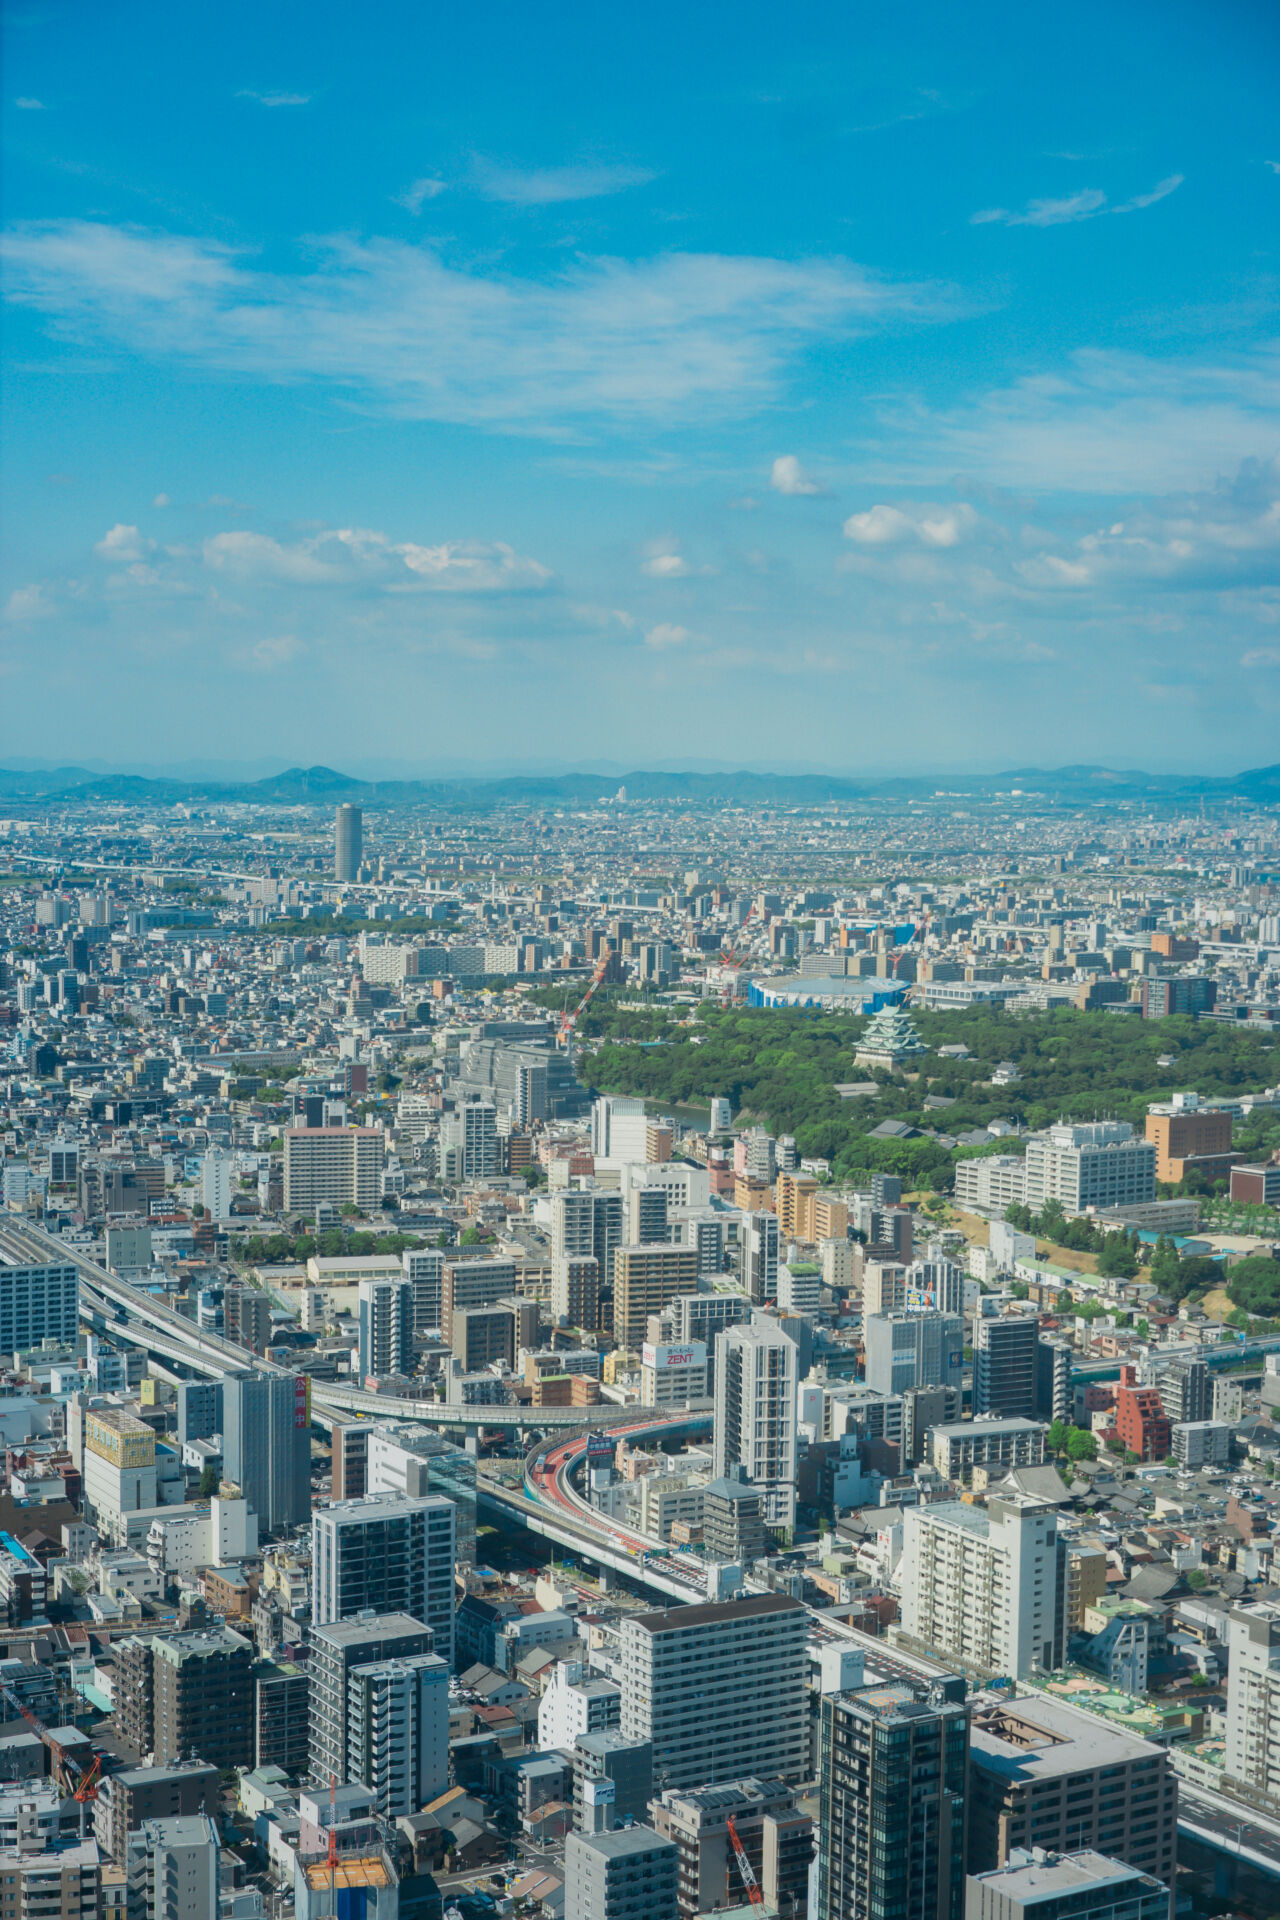 Gaze upon the city below you and find famous landmarks such as Nagoya Castle.